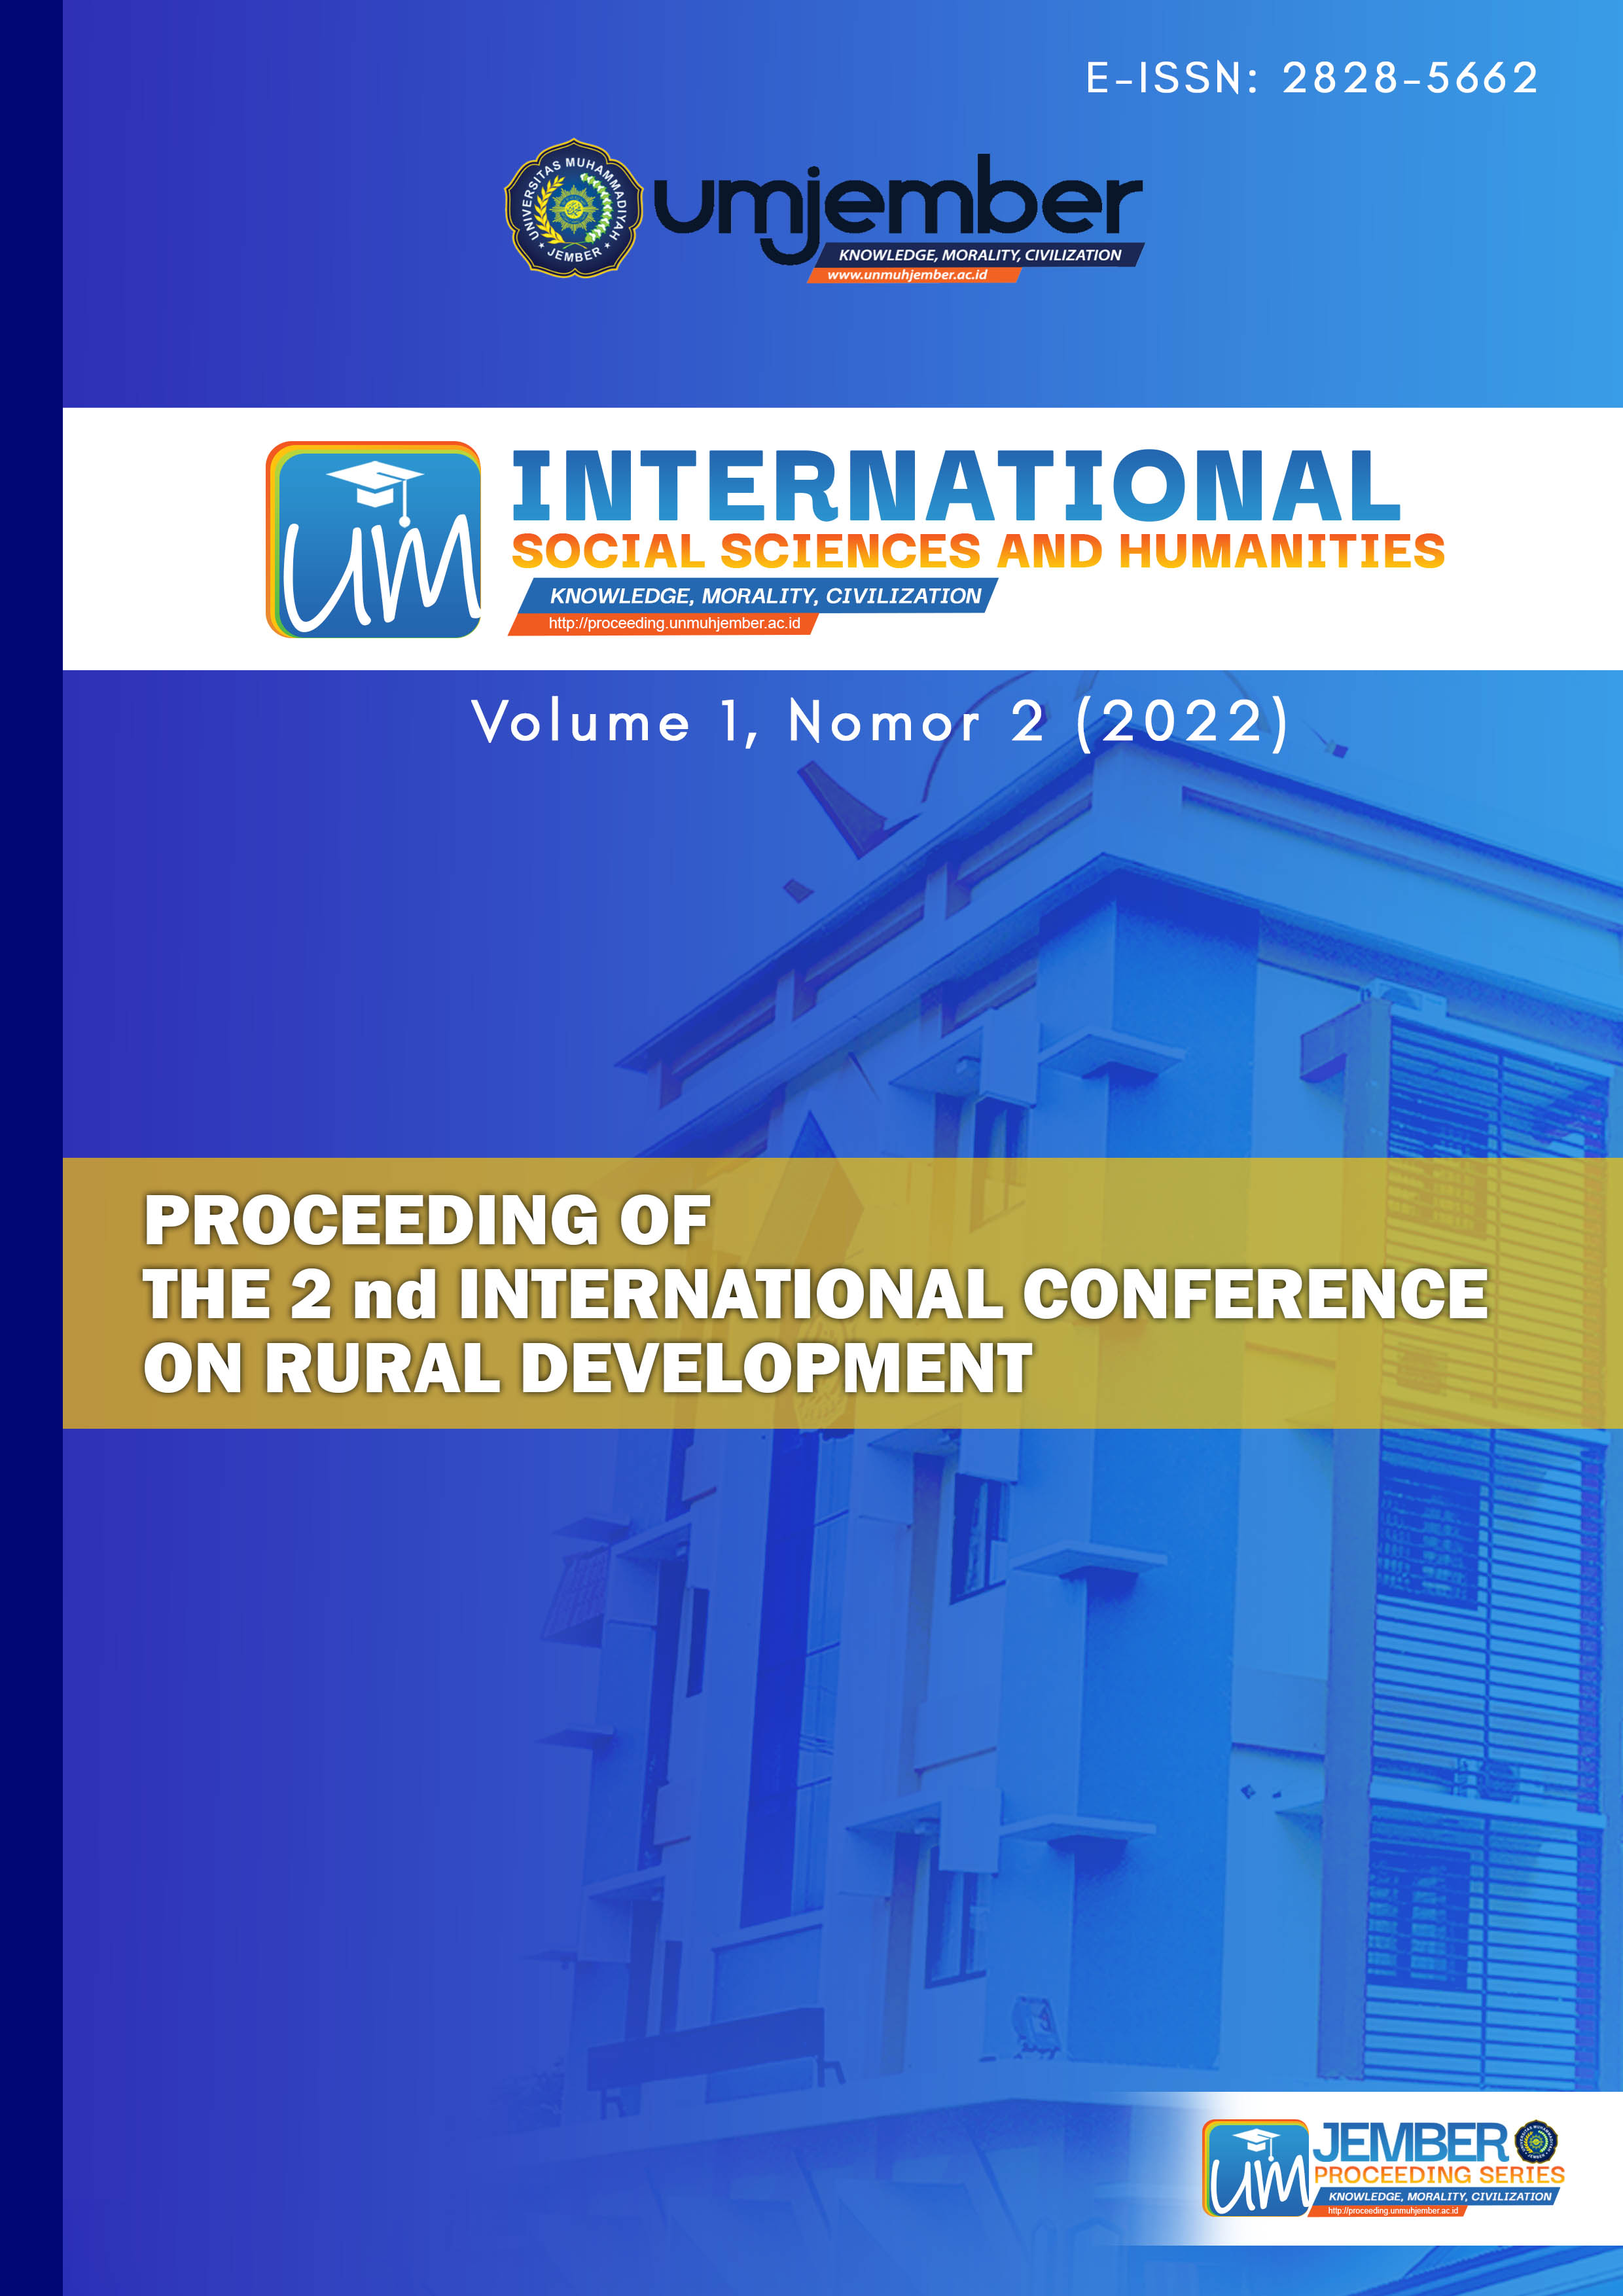 					View Vol. 1 No. 2 (2022): Proceedings of International Conference on Rural Development (ICRD) 2022
				